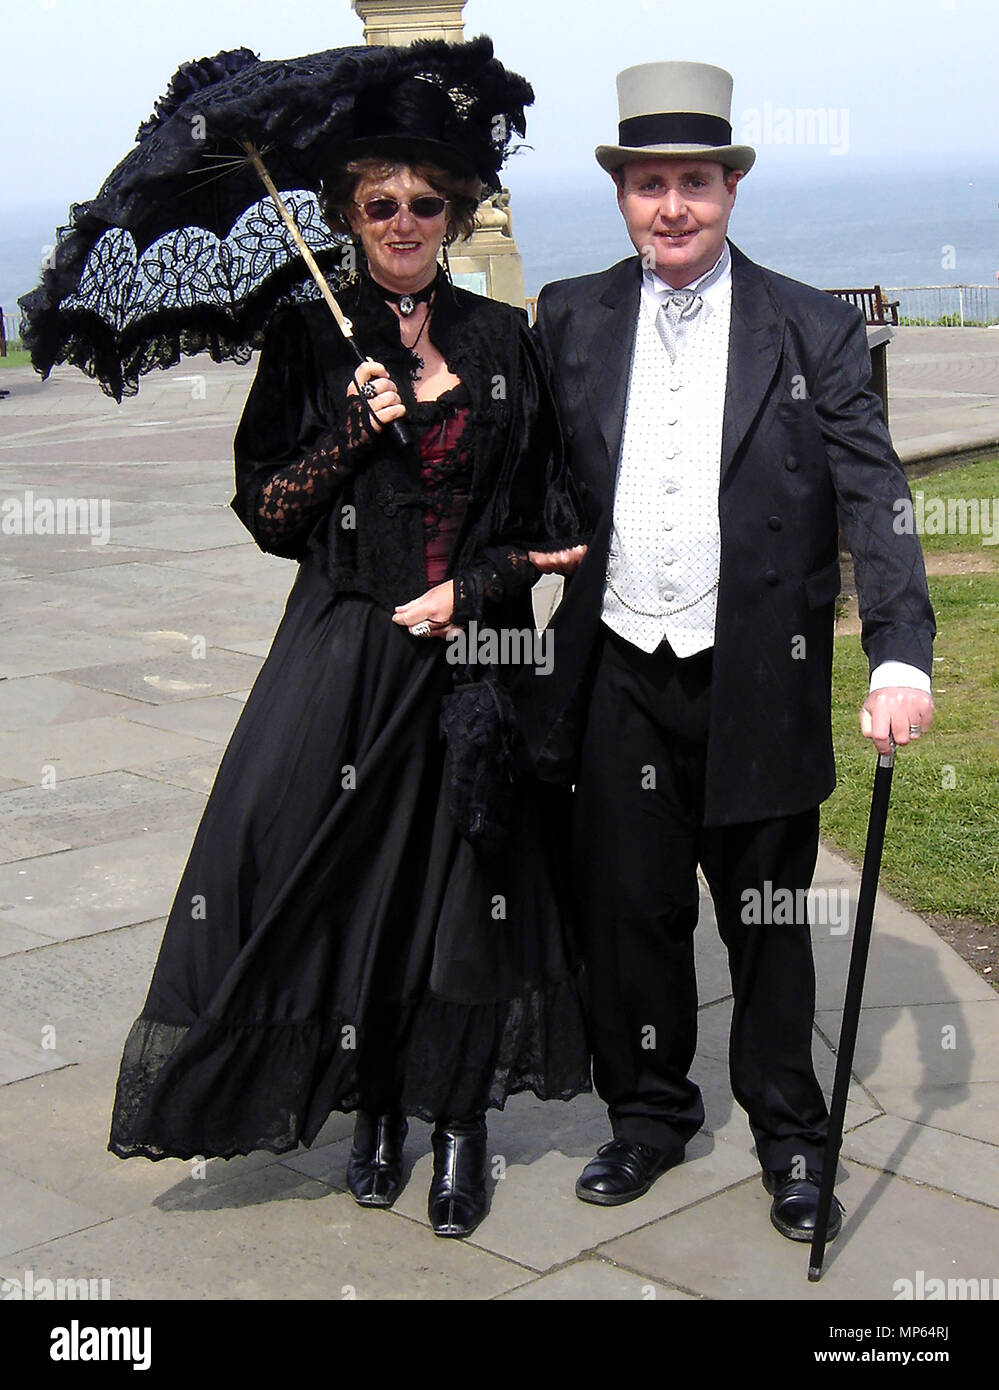 ELEGANCE - Not all goths are bizarrely dressed  during the annual Gothic festival at Whitby, Yorkshire UK. Stock Photo